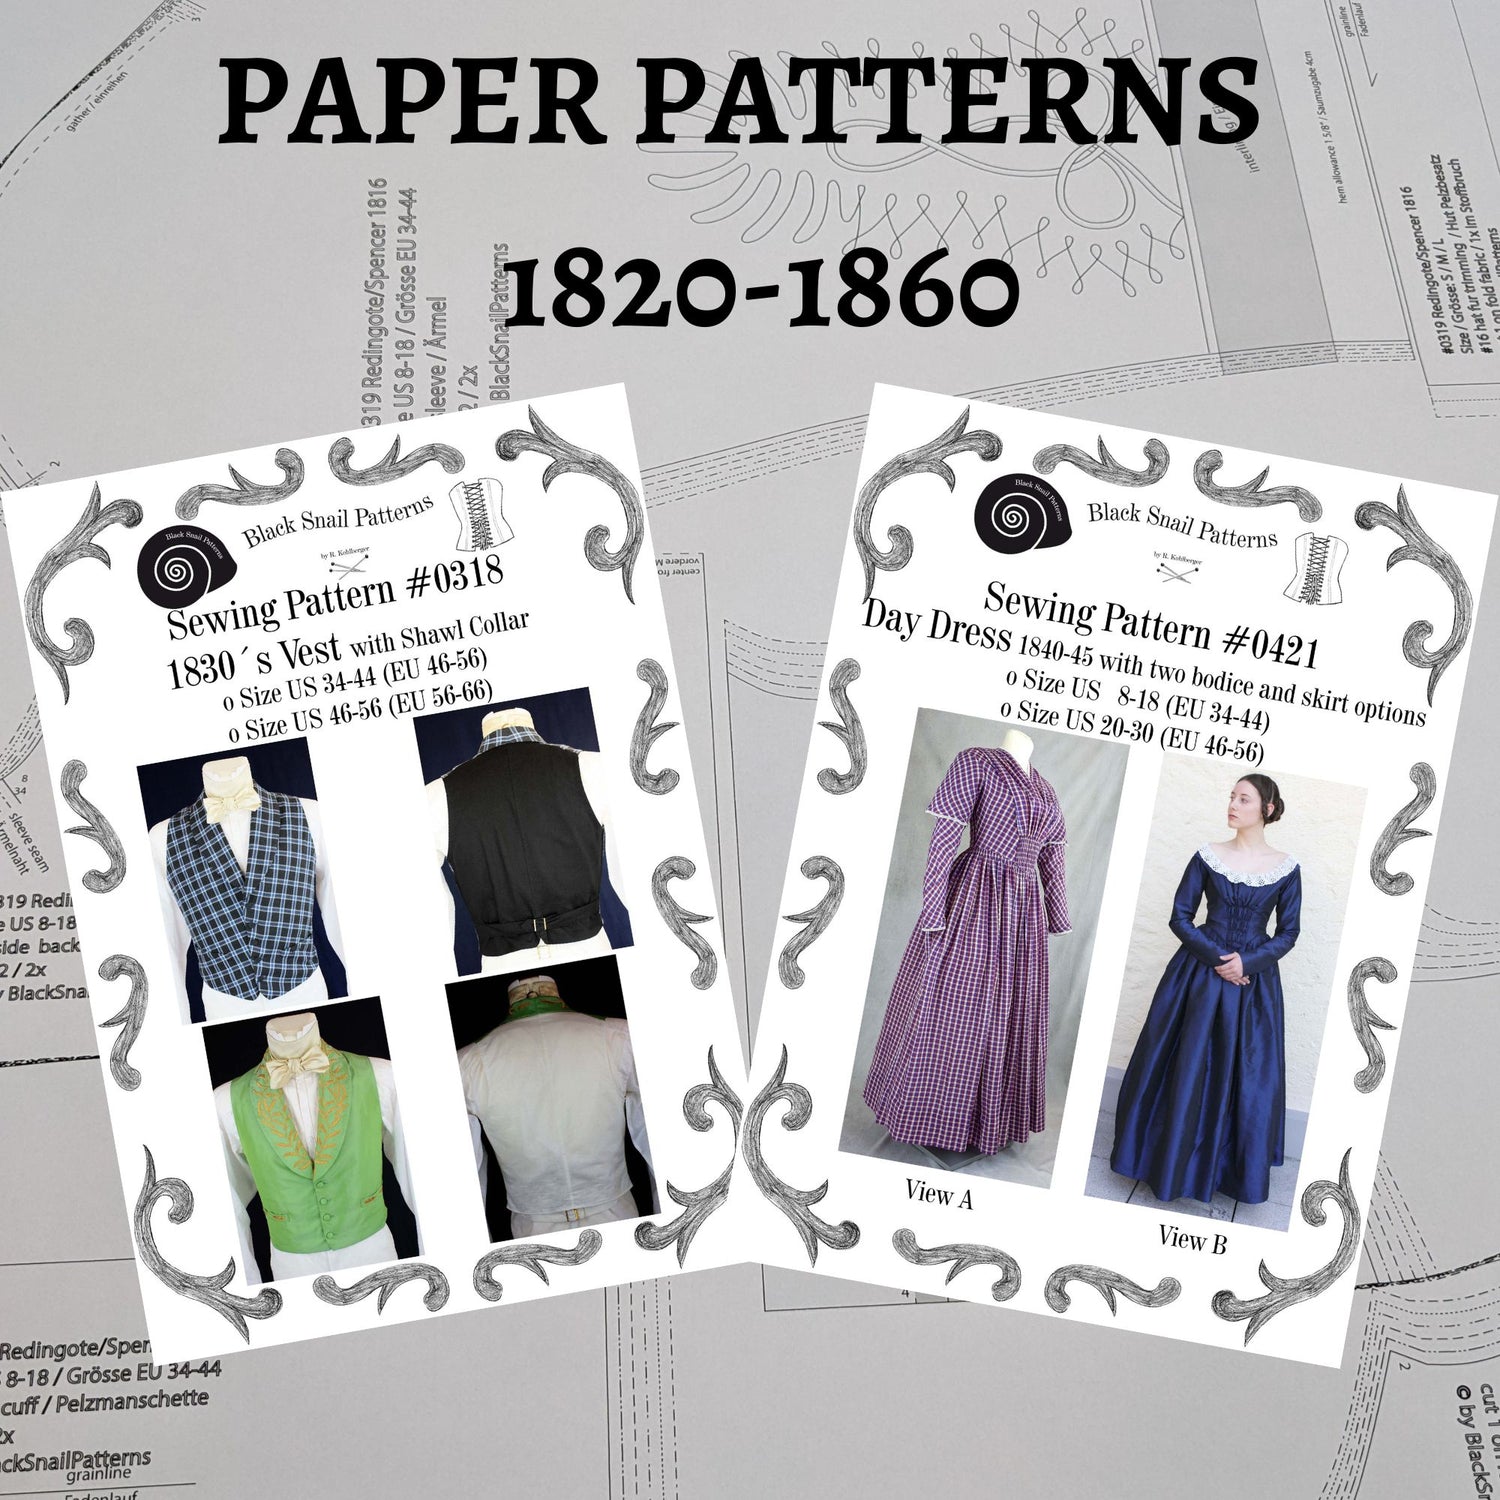 Paper pattern 1820-1860 for Women and Men